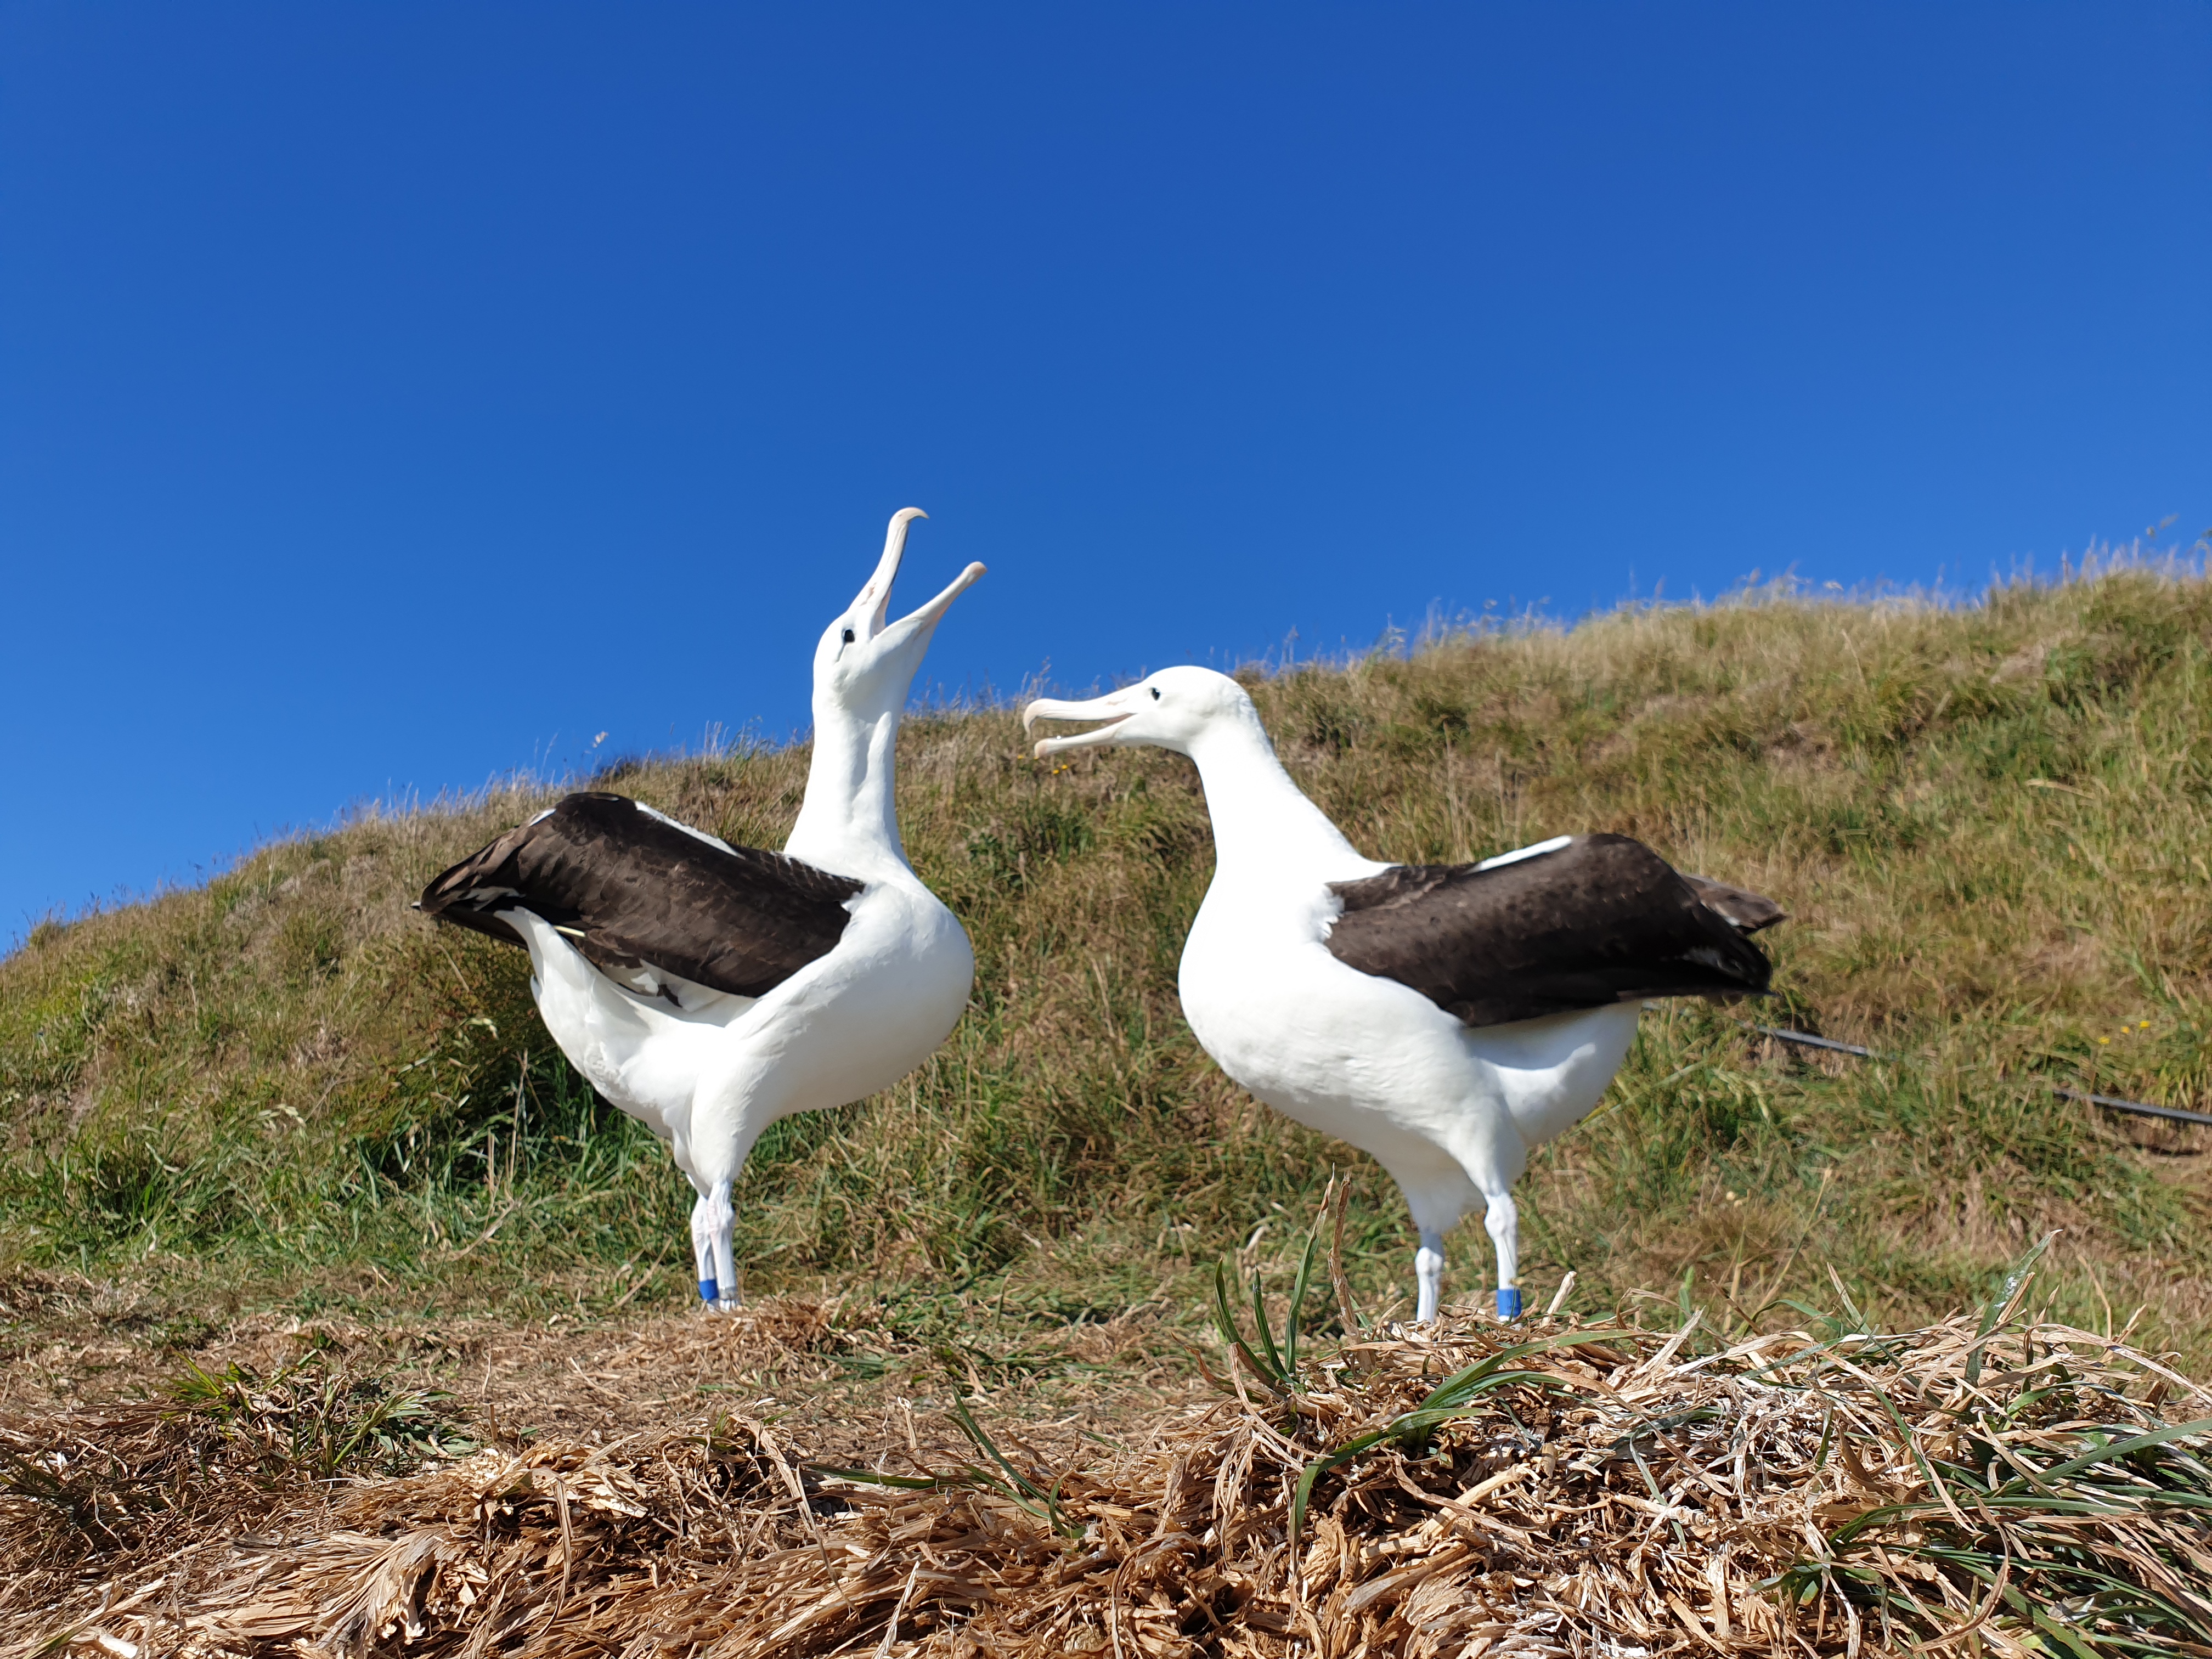 Adolescent albatross spend the summer months looking for a mate